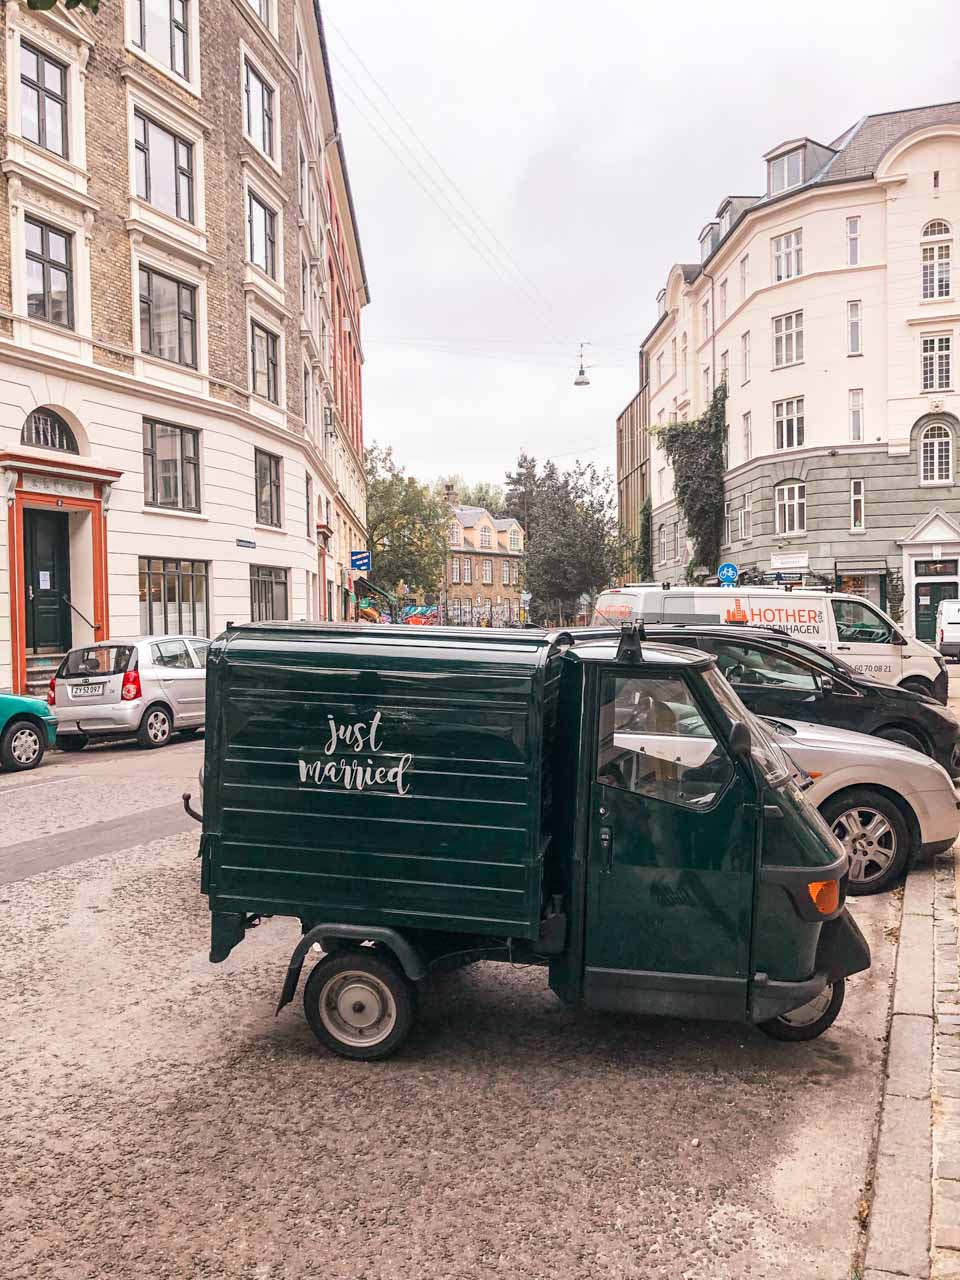 A tiny car with a 'just married' sticker on it parked on one of the streets in Copenhagen, Denmark